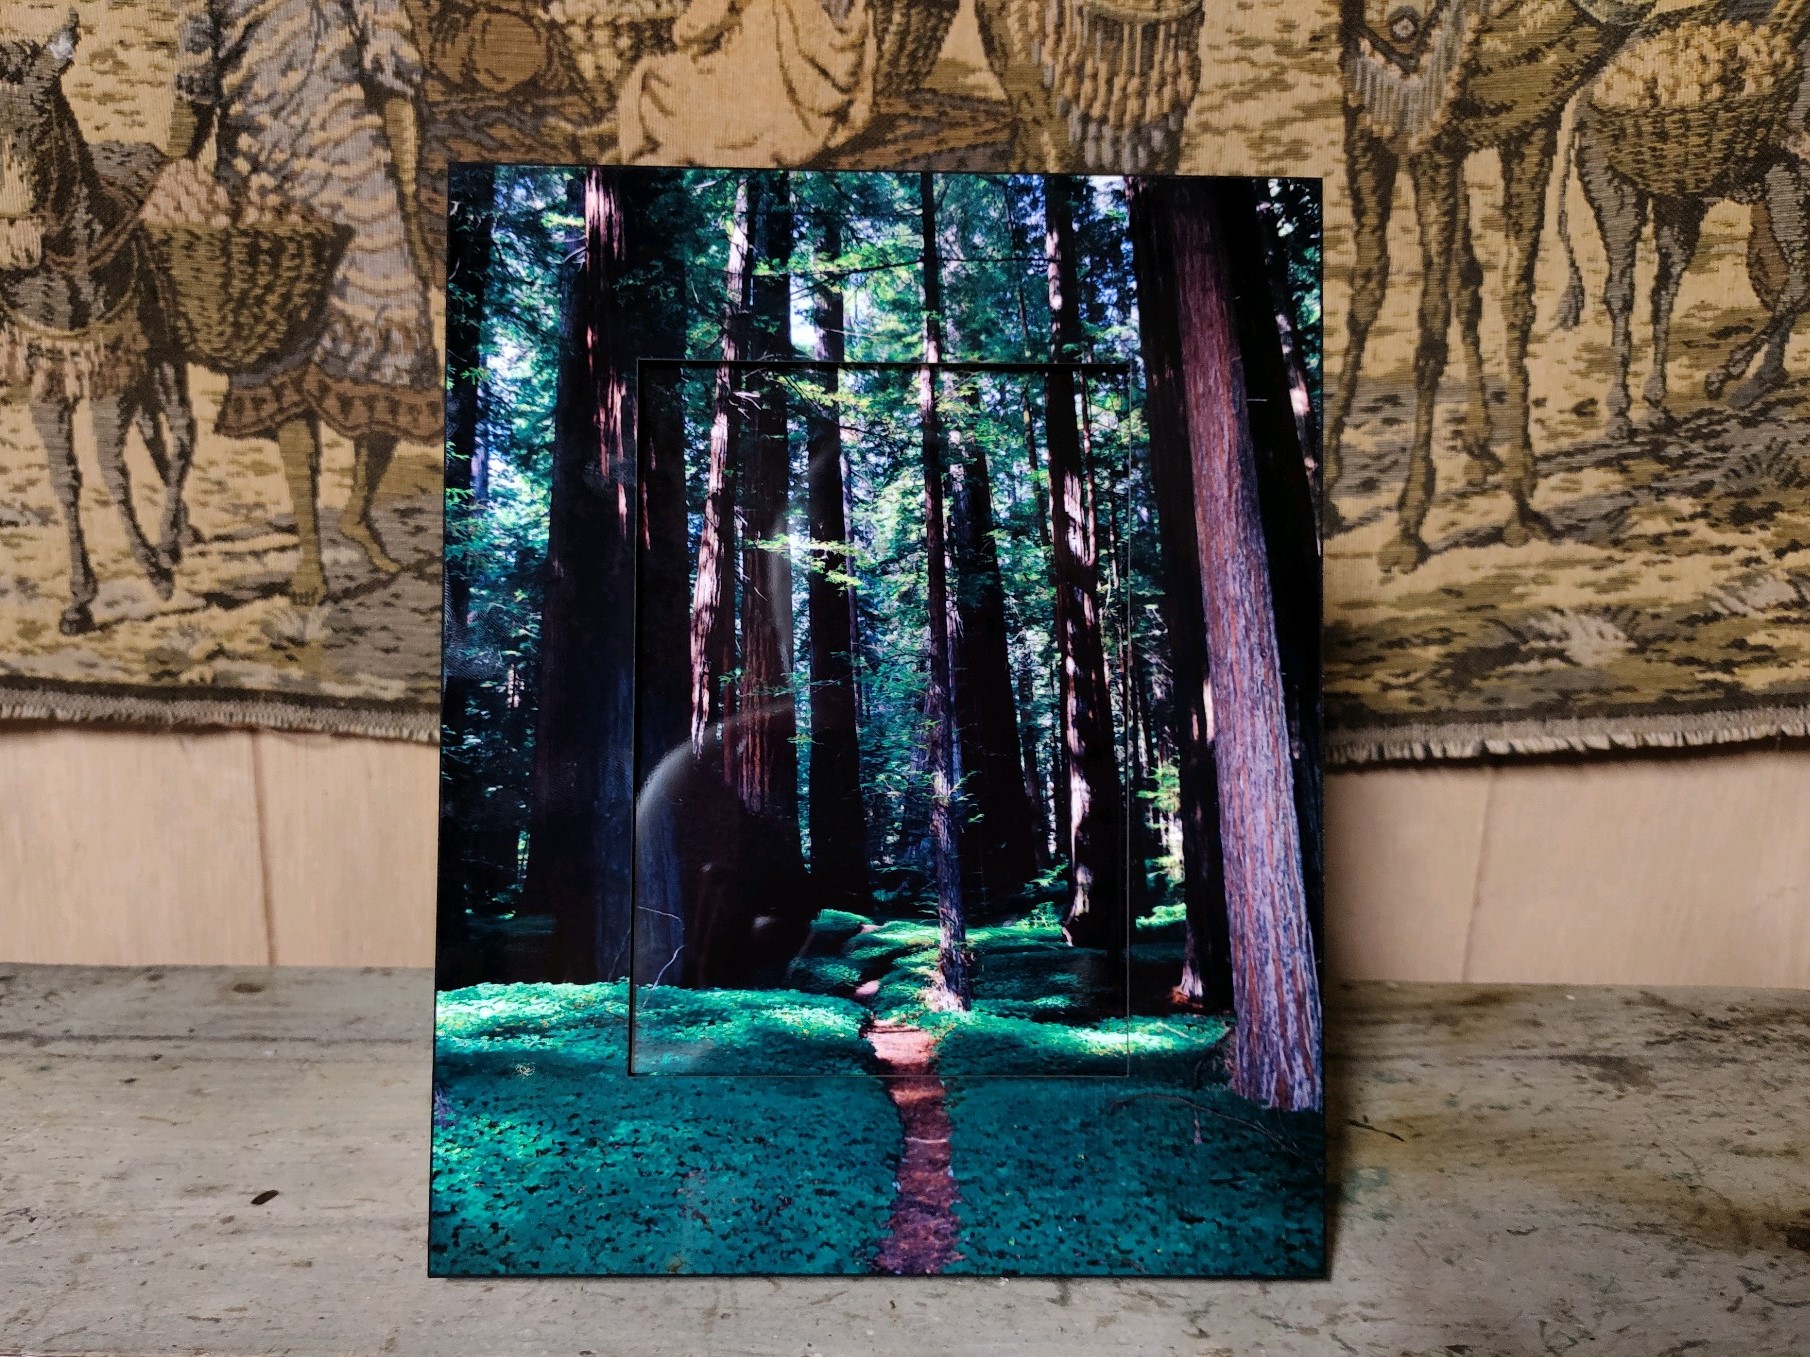 Redwood Trails: an image of a trail in the redwood forest of Northern California. Artist W. J. 